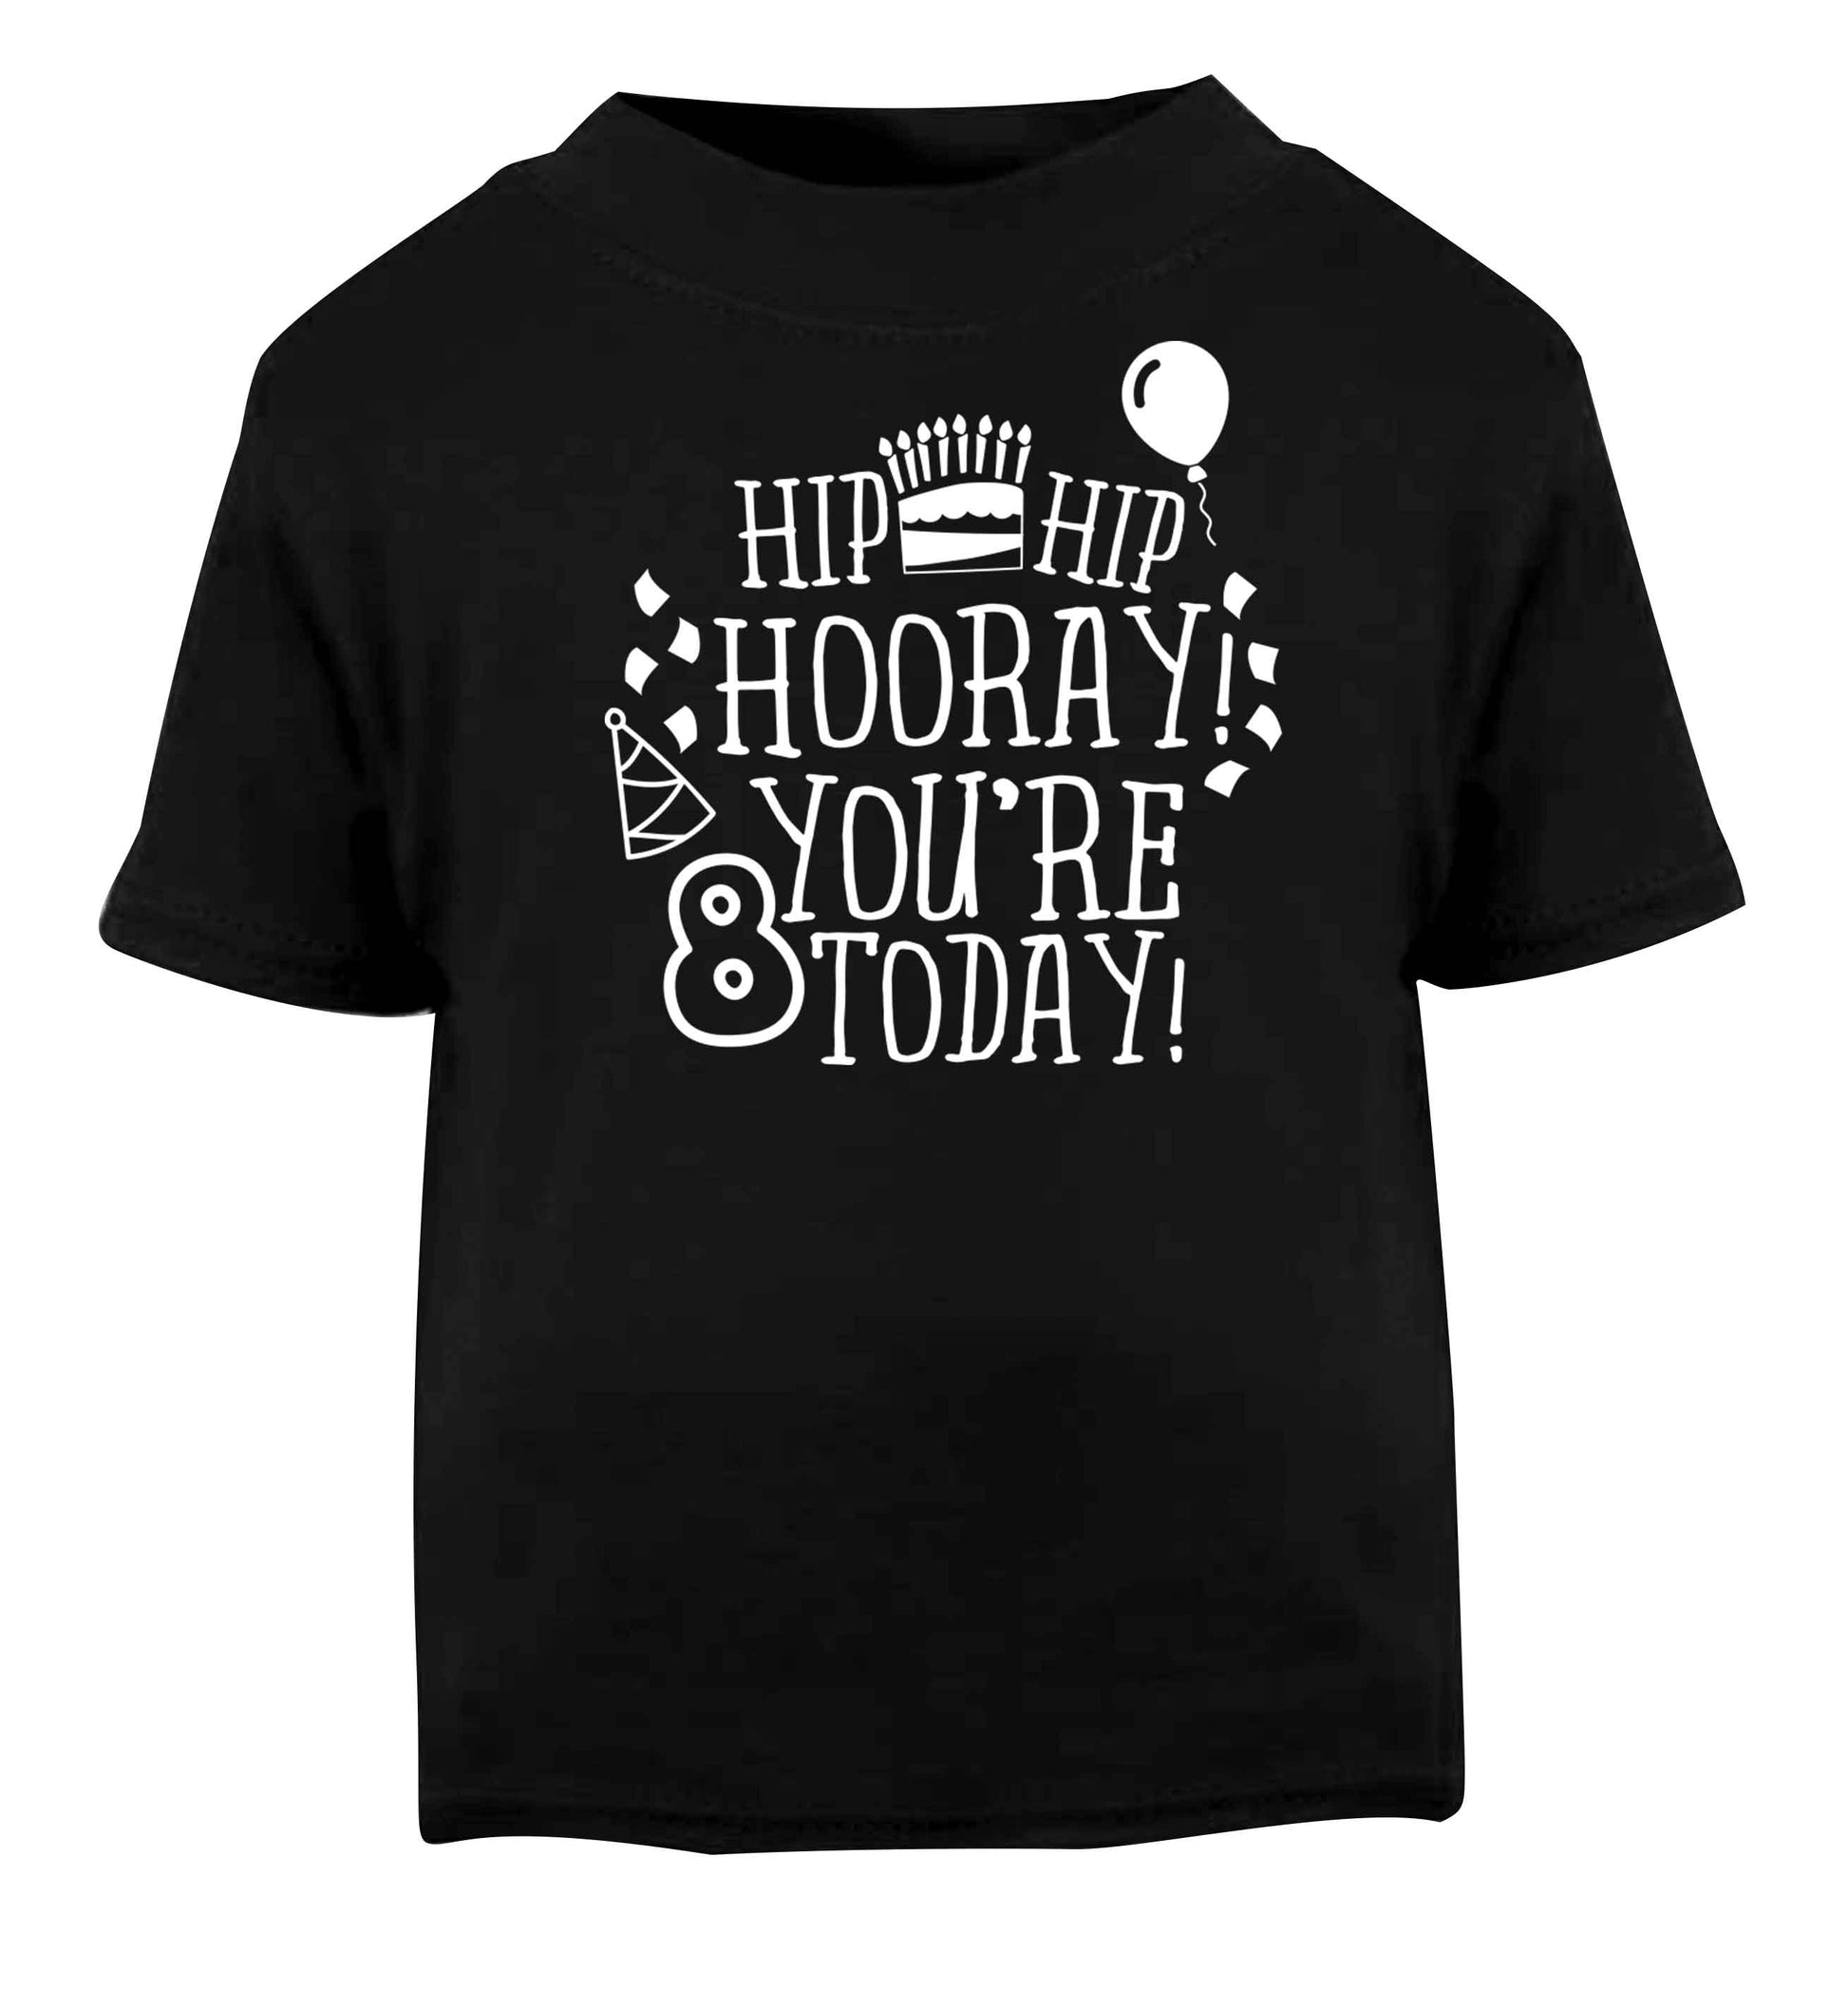 Hip hip hooray you're 8 today! Black baby toddler Tshirt 2 years